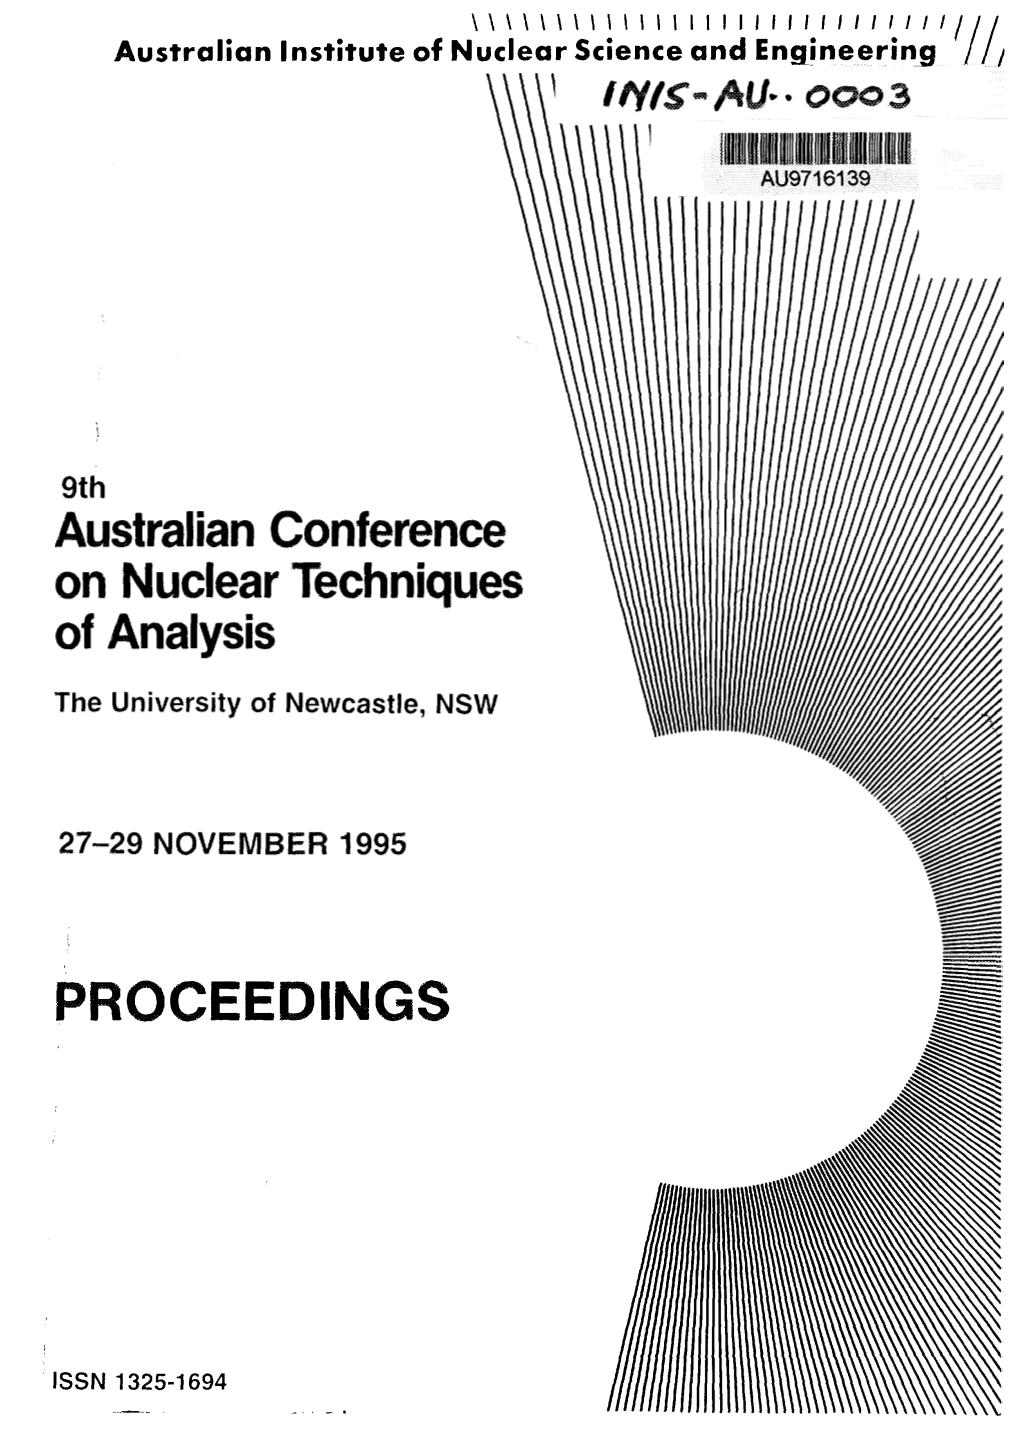 9Th Australian Conference on Nuclear Techniques of Analysis. Proceedings